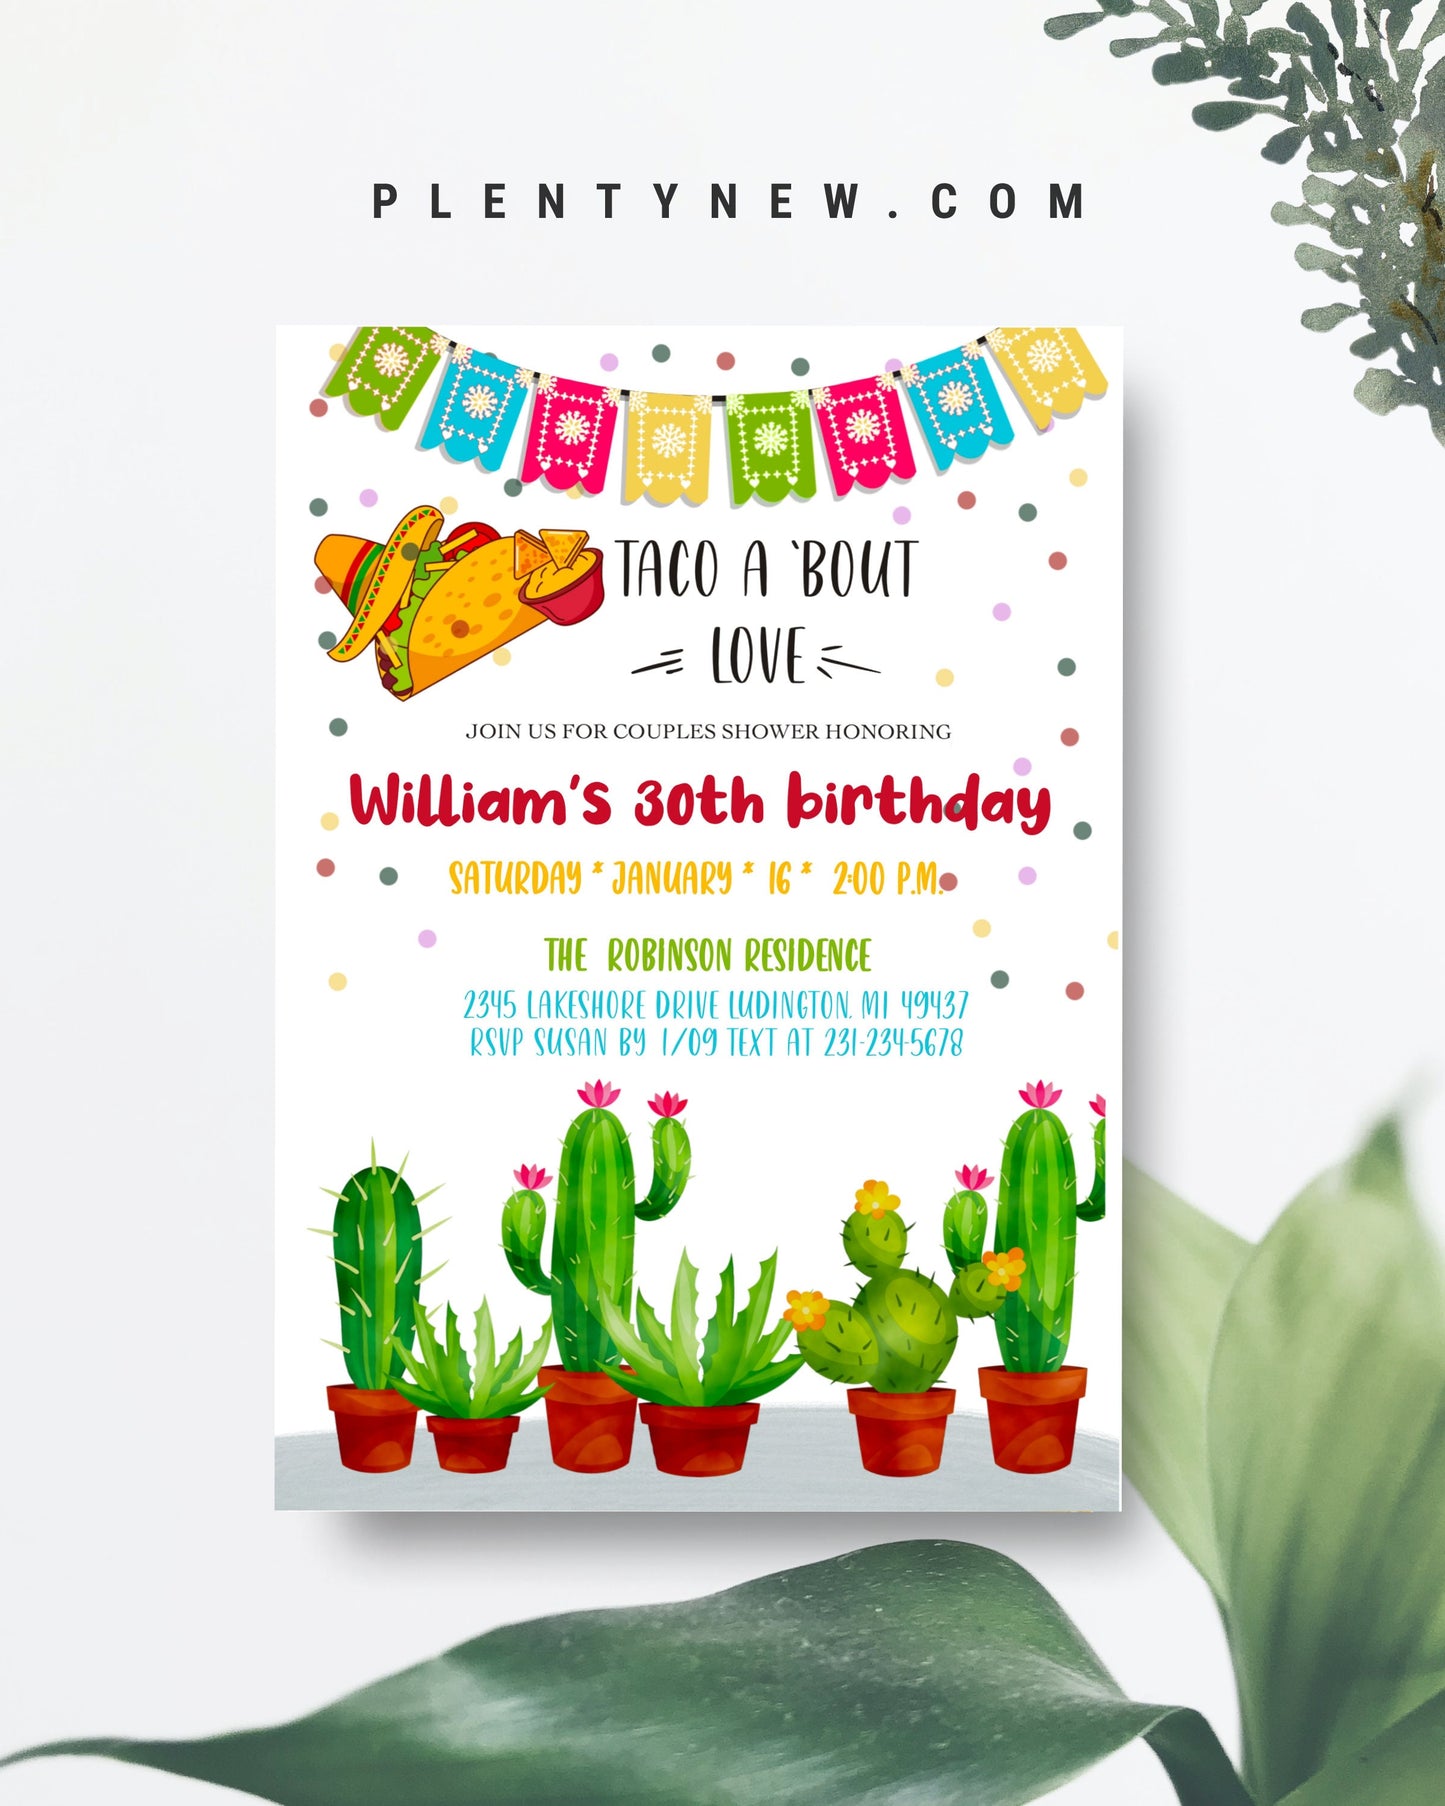 Any Age Taco Bout a Party Invitation - Fiesta Birthday Party Invite Cactus Invite - Chalkboard Digital INSTANT download Editable Fiesta,  GM